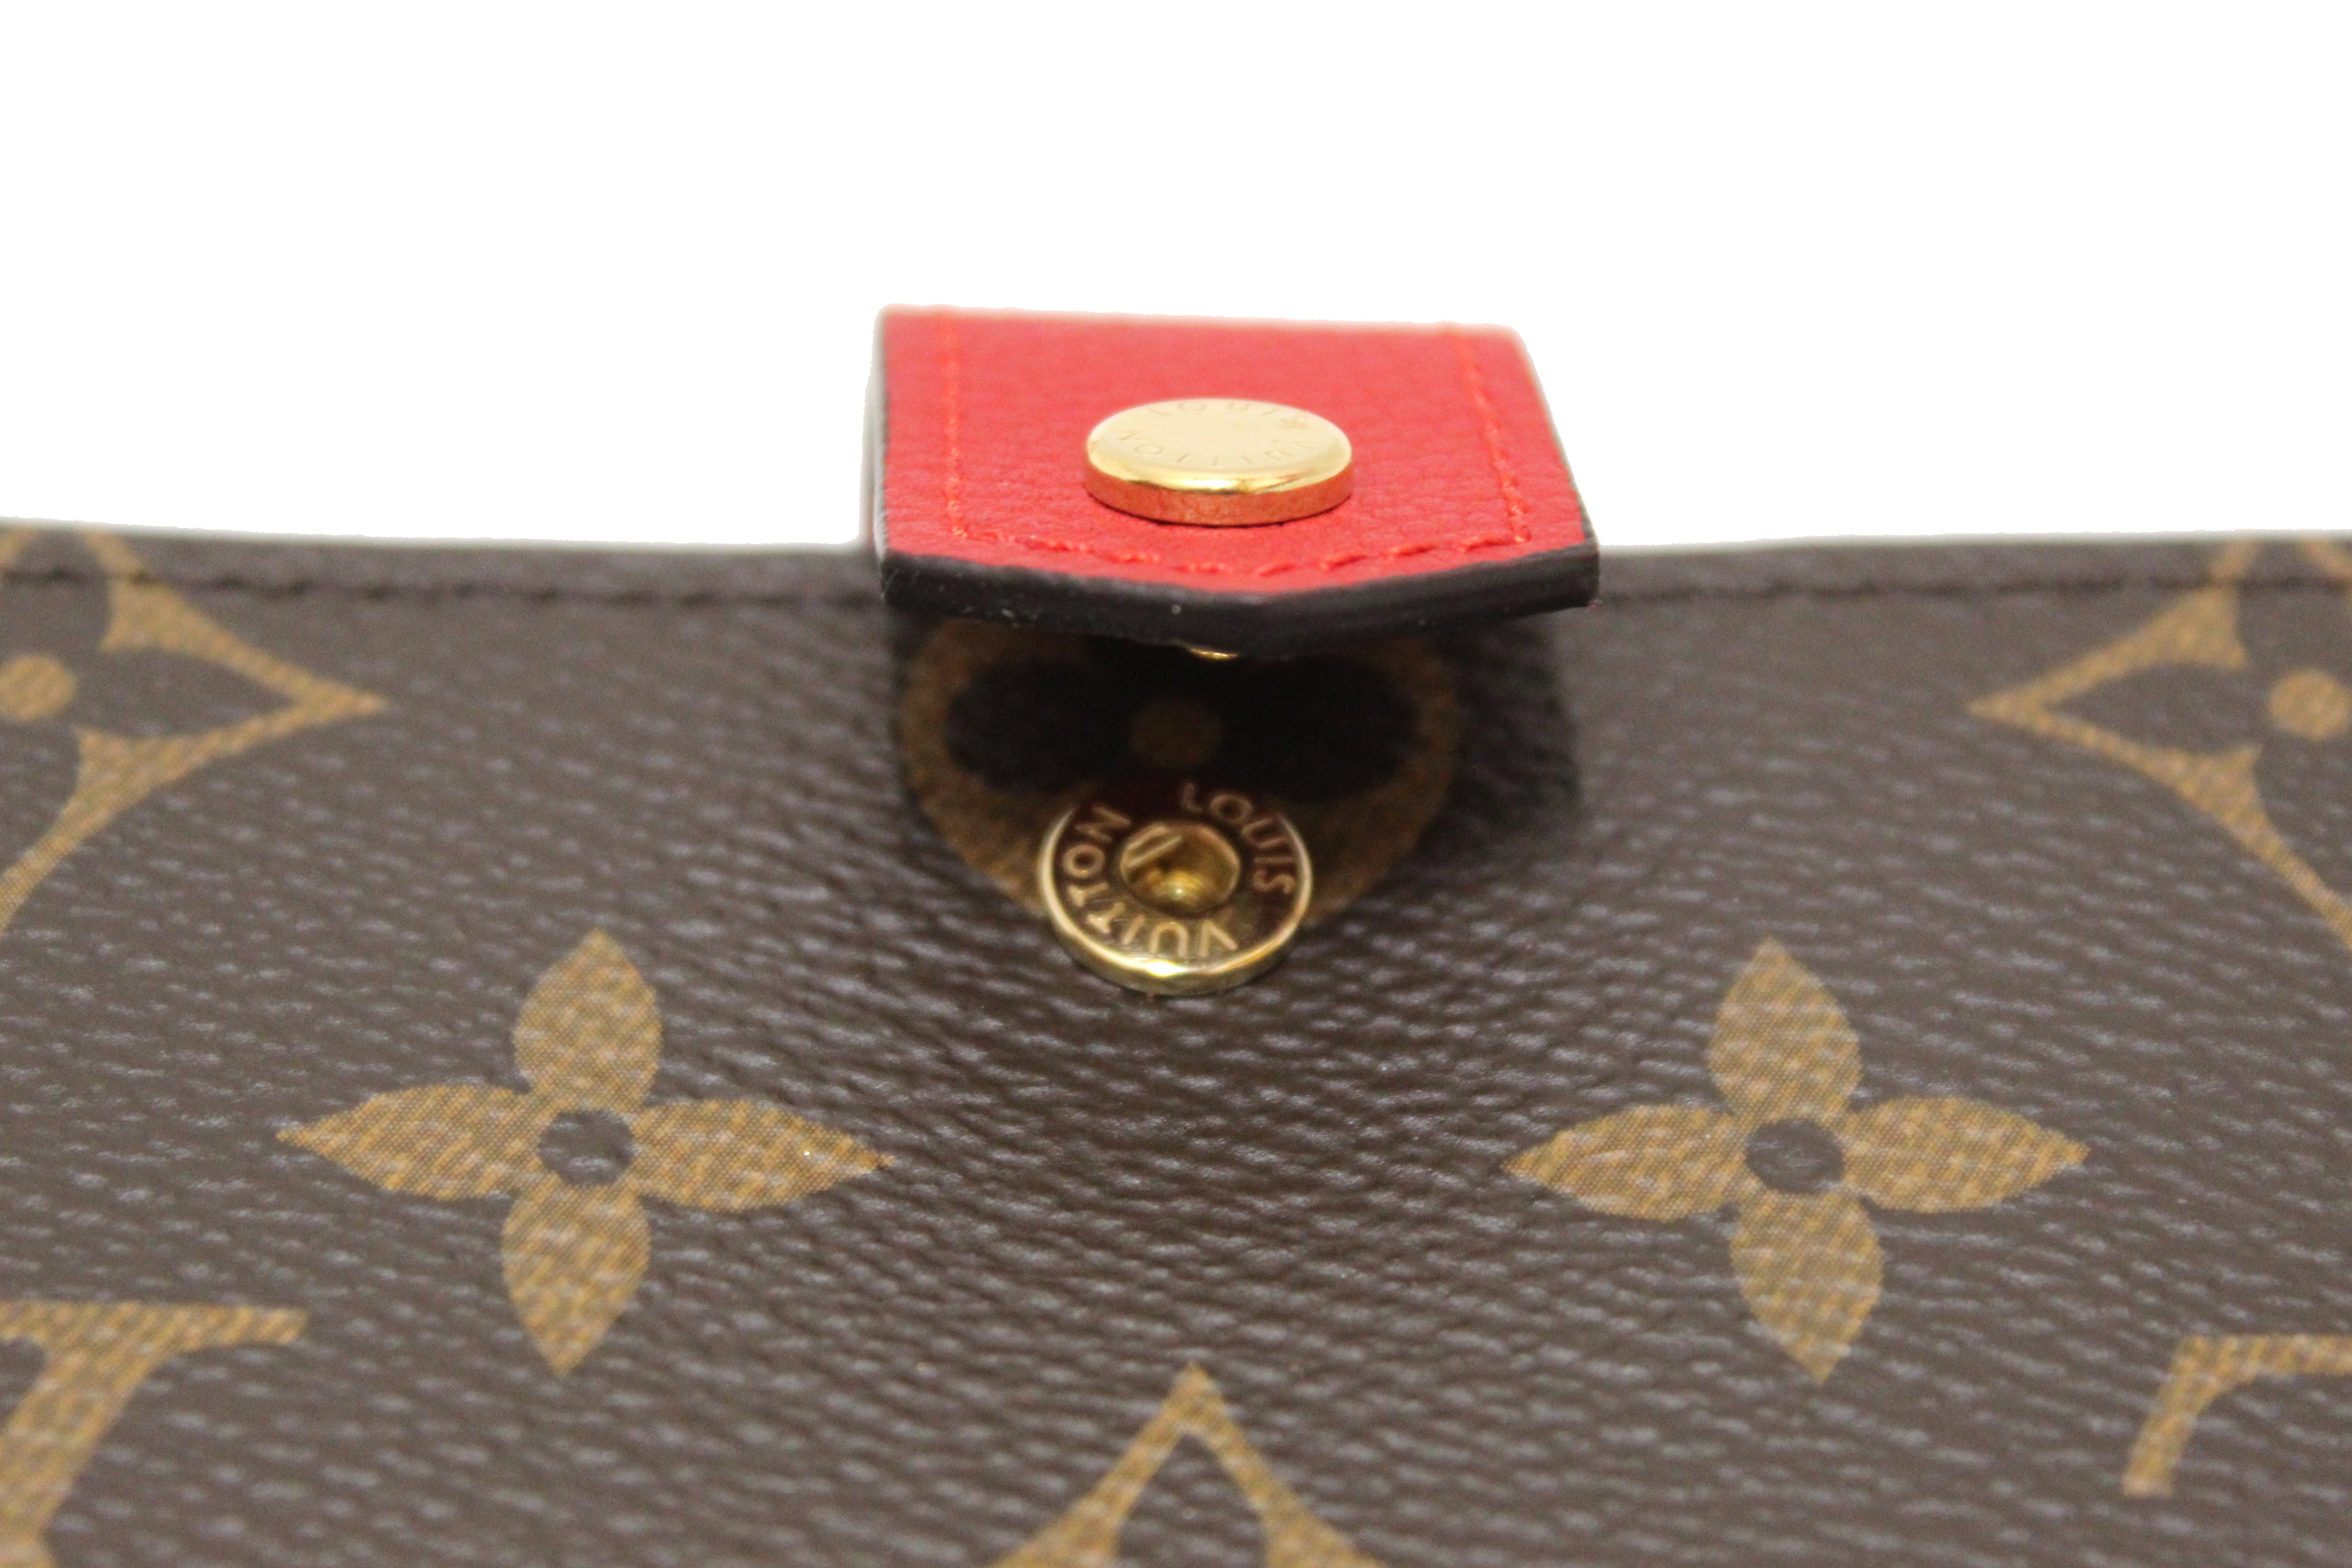 Authentic Louis Vuitton Classic Monogram and Red Calfskin Leather Pallas Compact Wallet